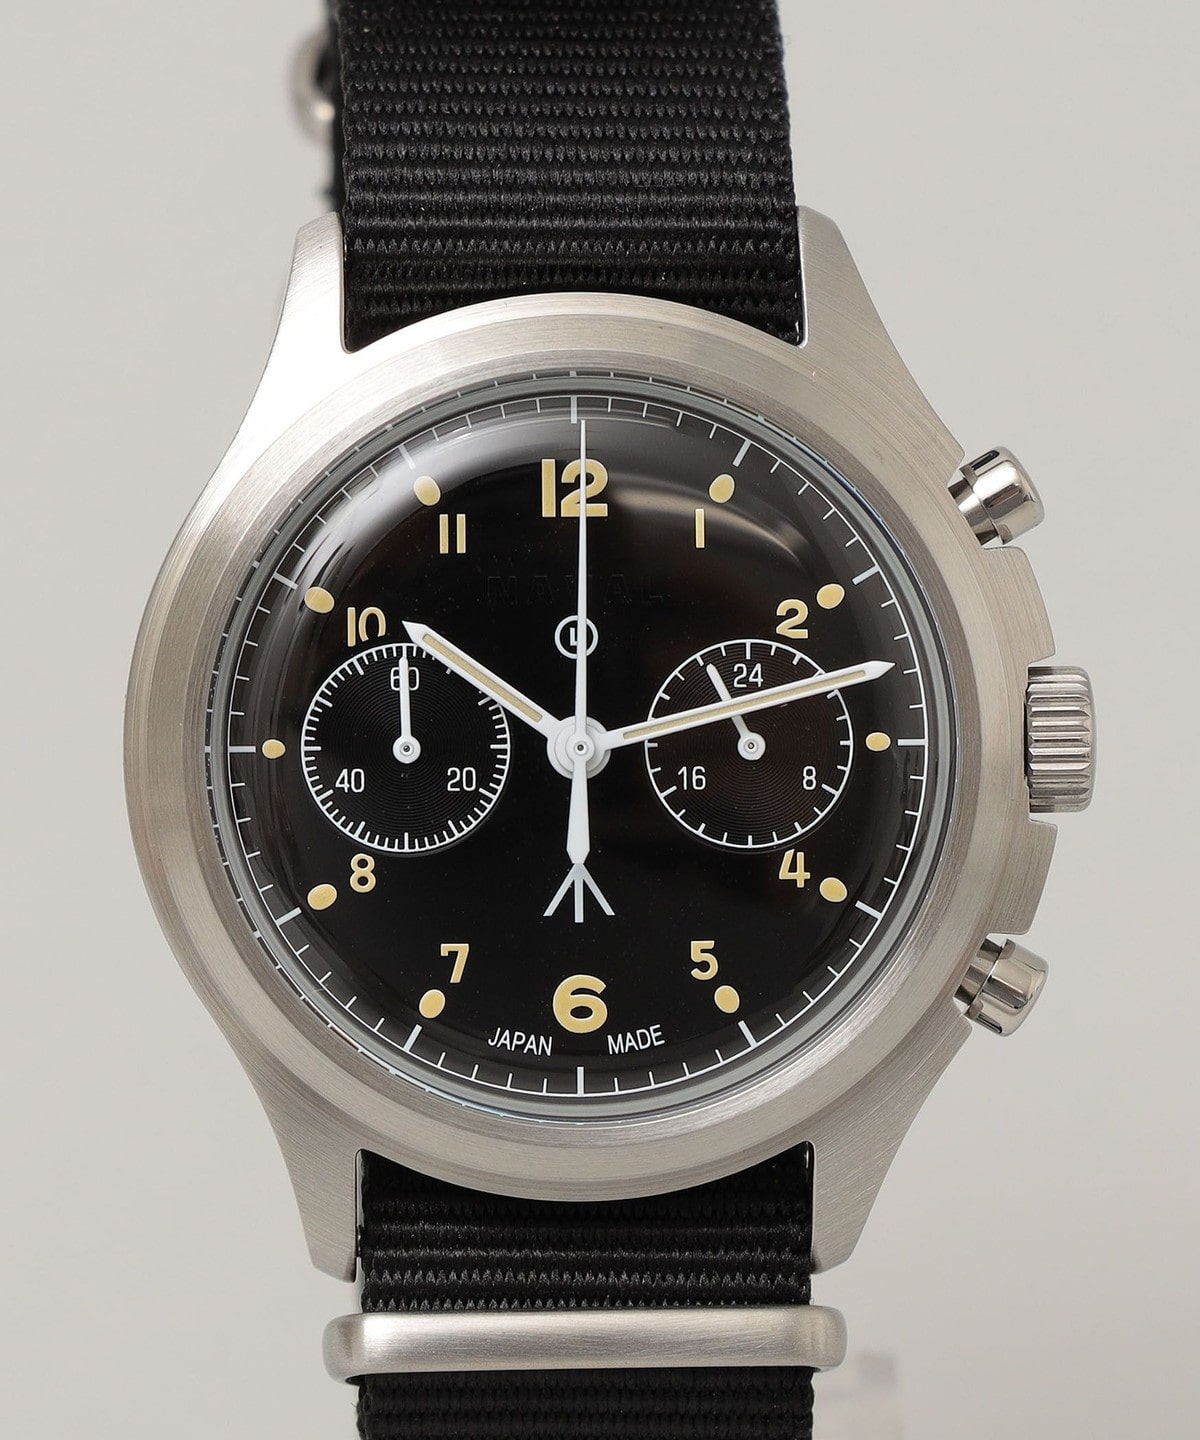 NAVAL WATCH: ROYAL AIR FORCE Chronograph TYPE: 小物 SHIPS 公式